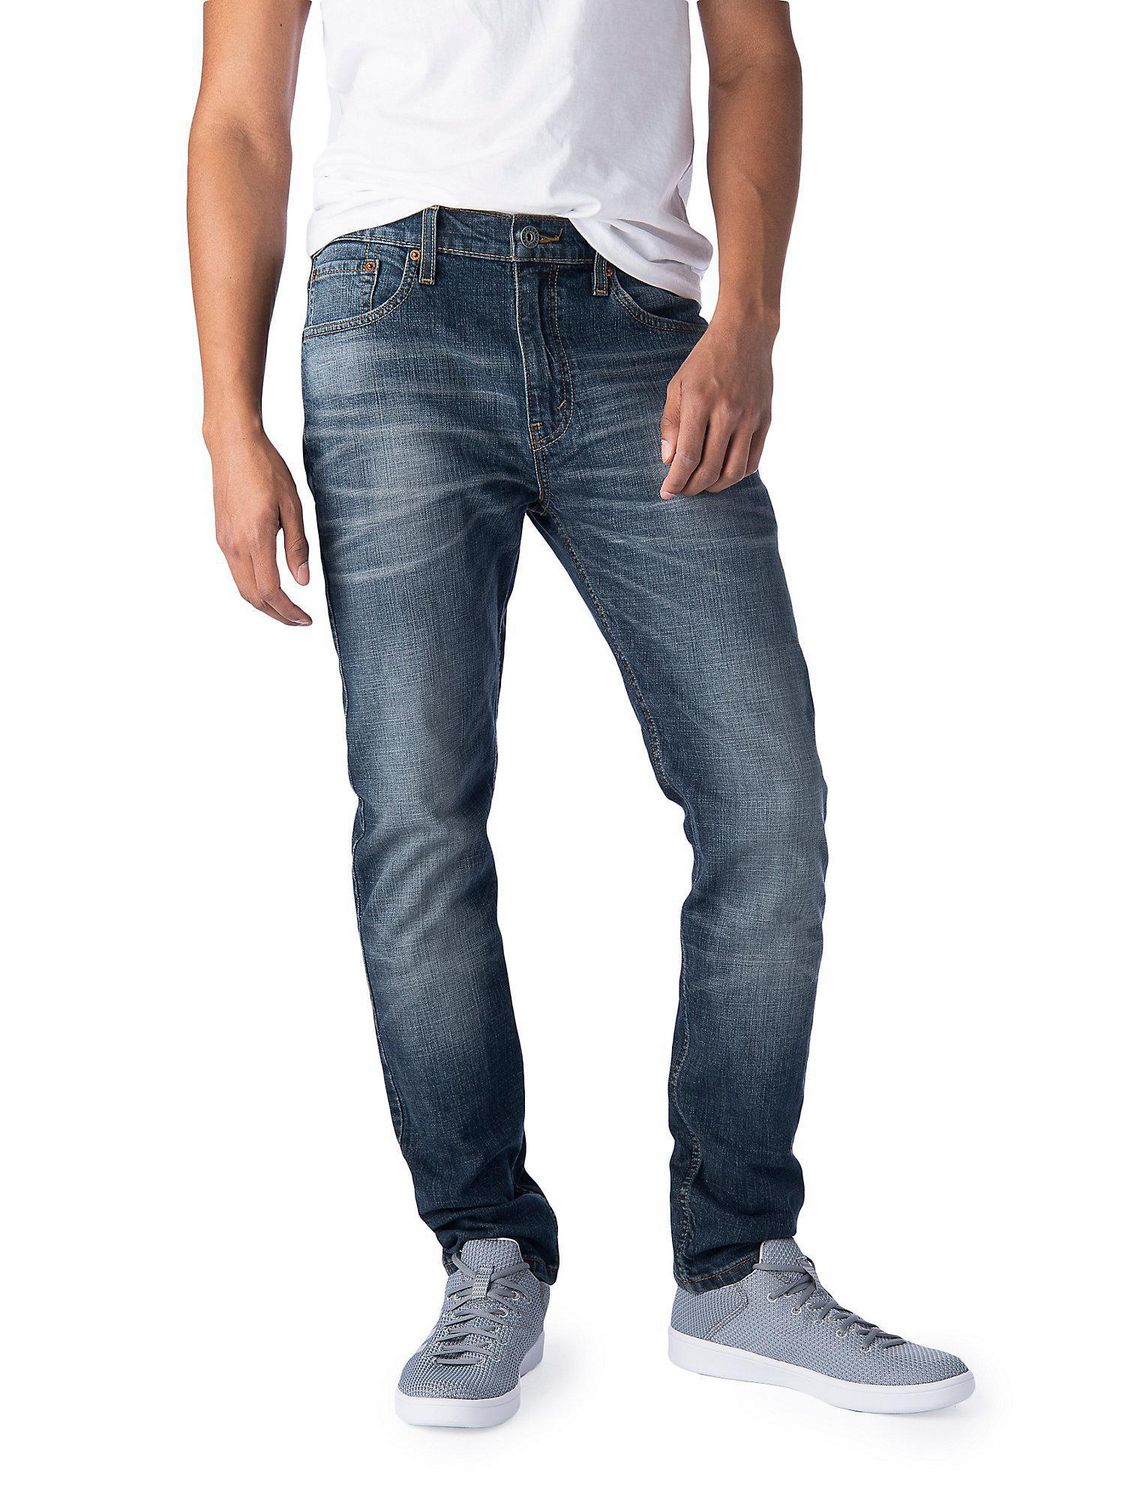 Signature by Levi Strauss & Co.™ Men's S37 Slim Fit | Walmart Canada